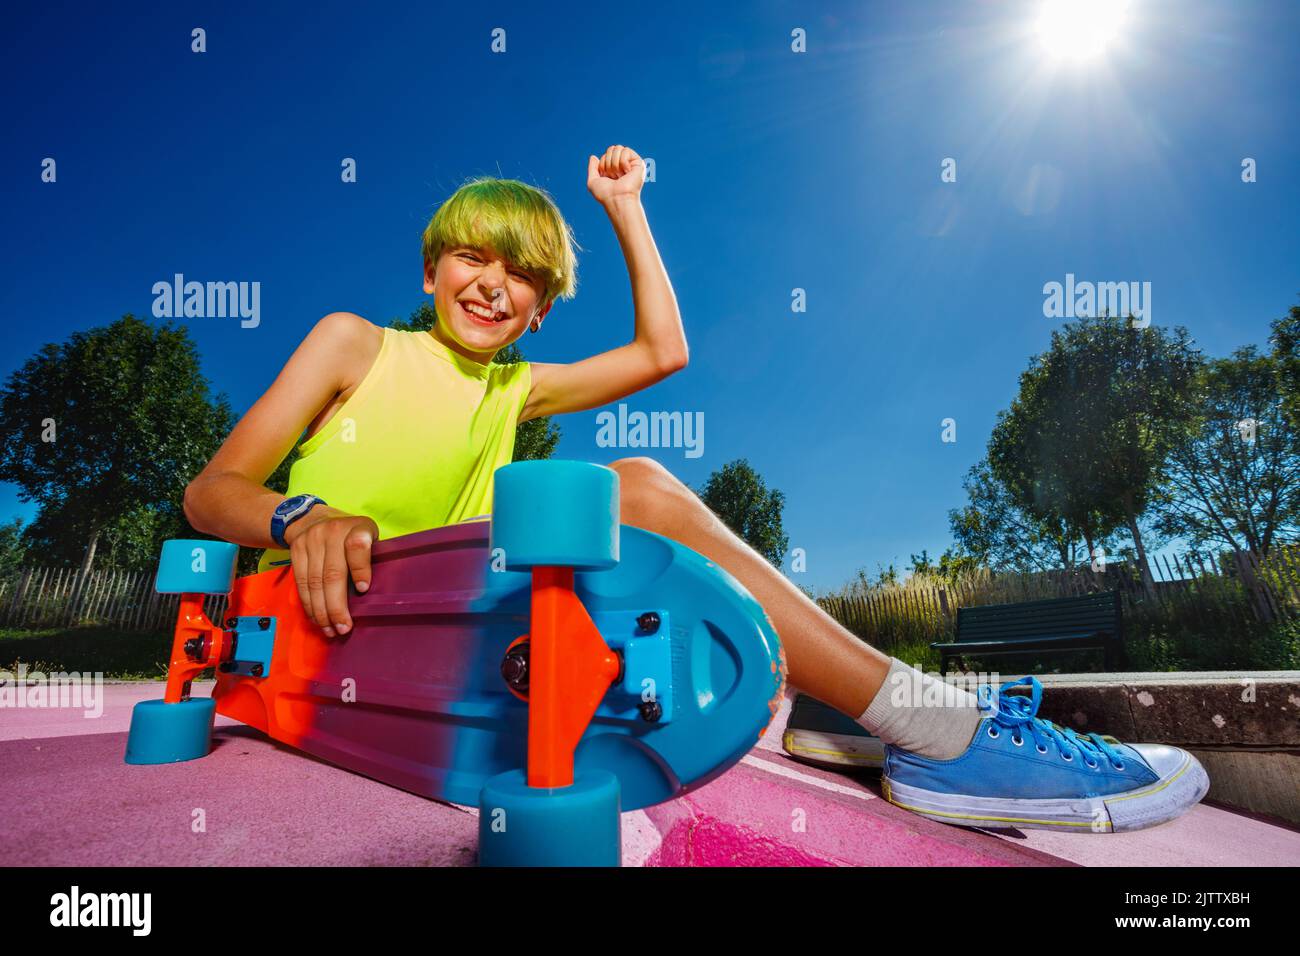 Cute skater boy with yes gesture sit holding skateboard in park Stock Photo